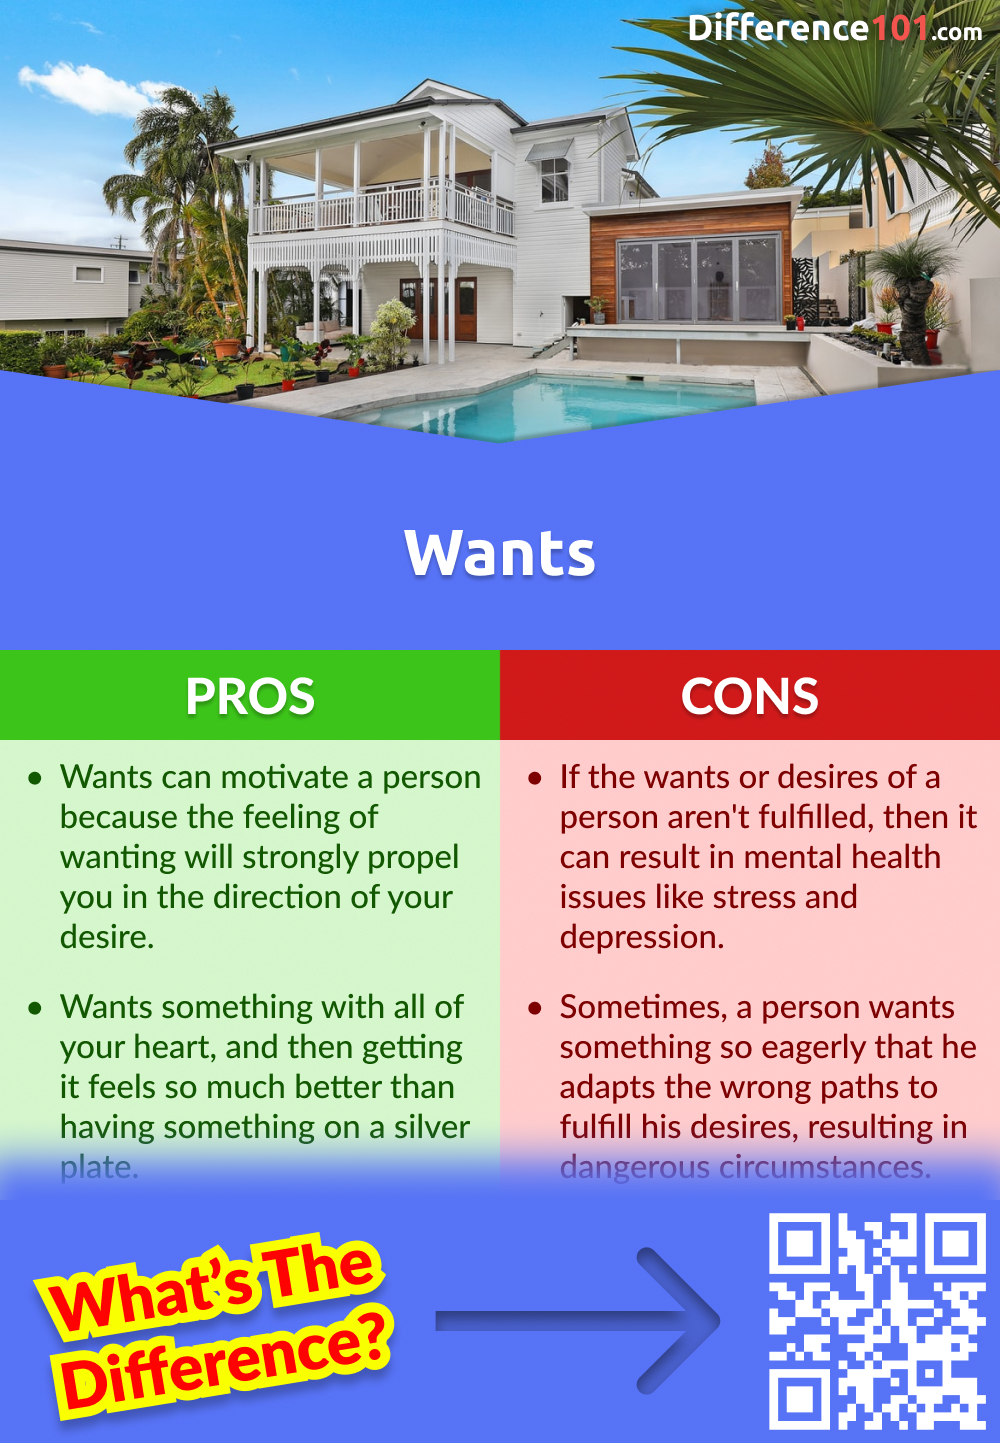 Wants Pros and Cons